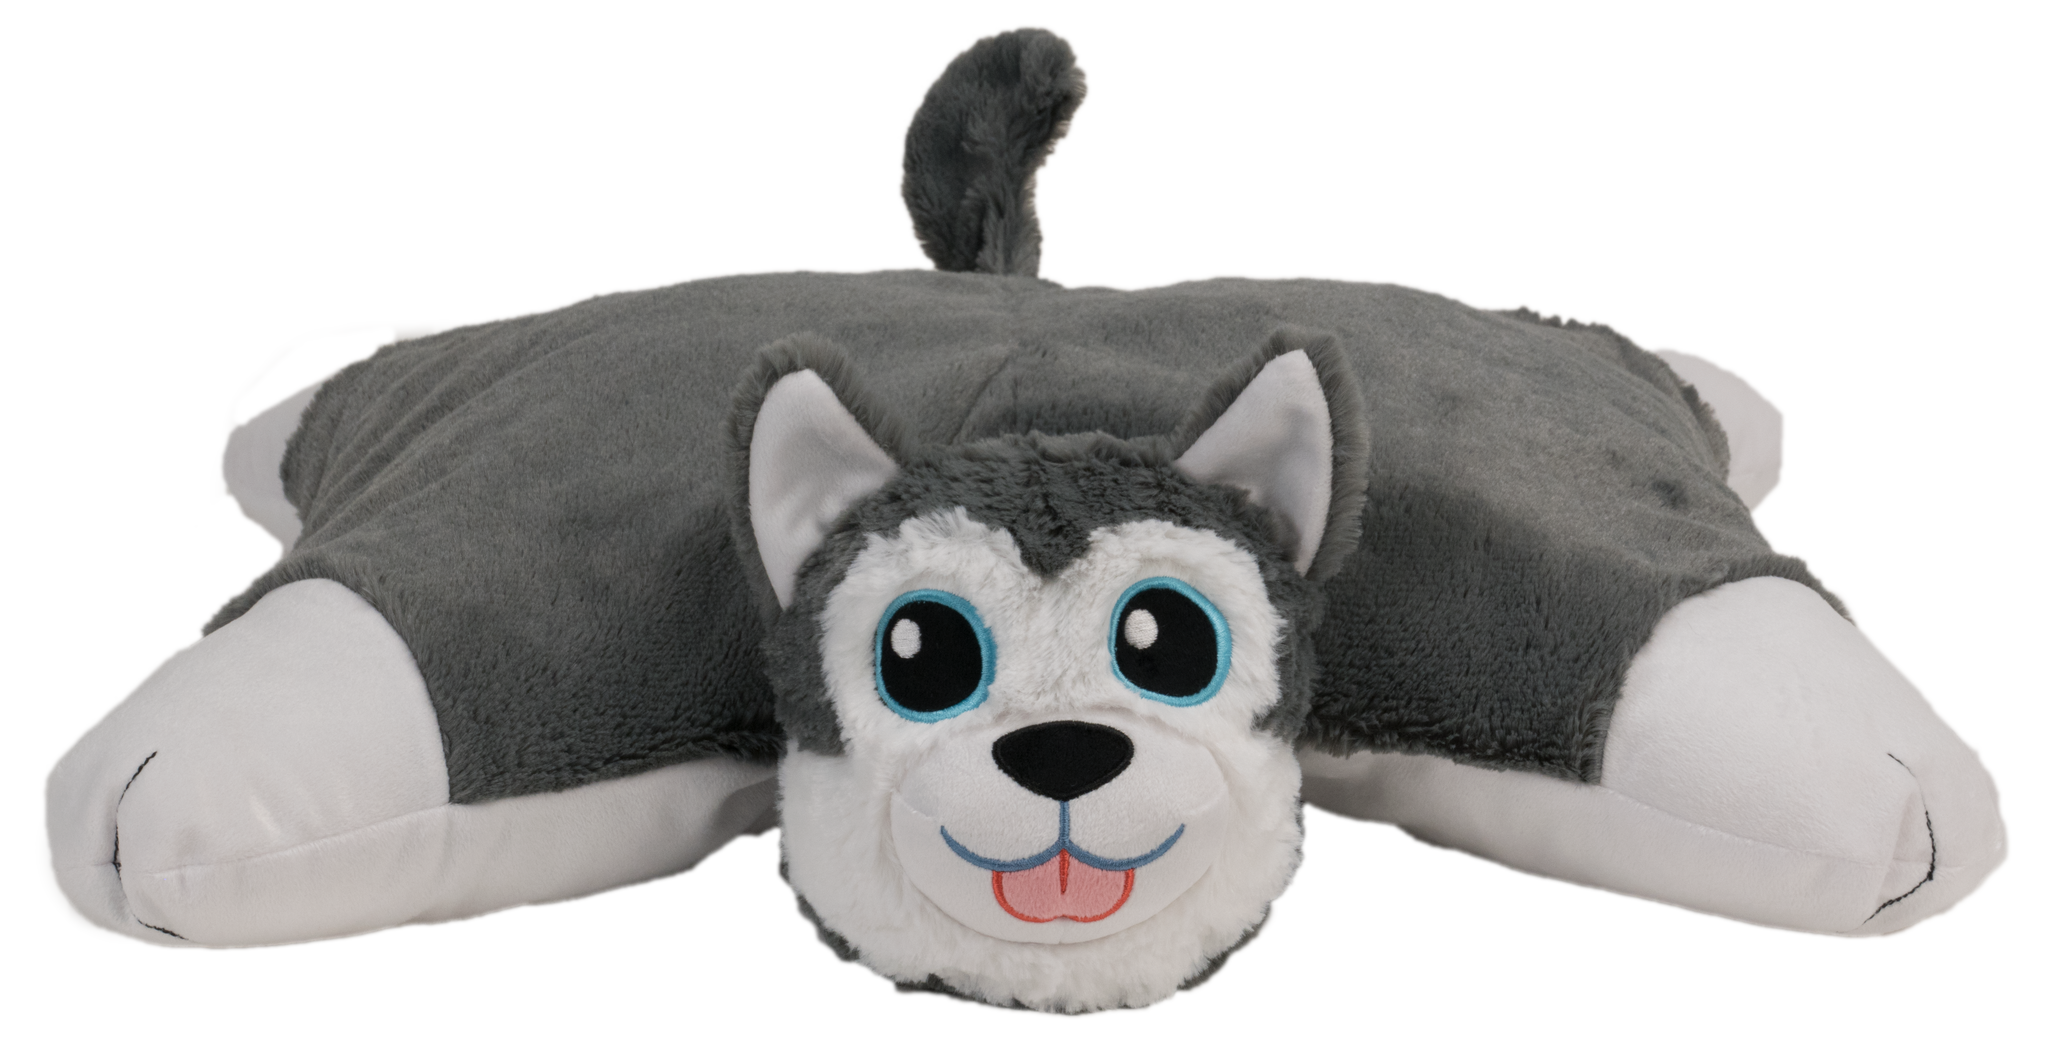 Flip 'N Play Friends 2 in 1 Plush to Pillow Husky to Polar Bear - image 3 of 3